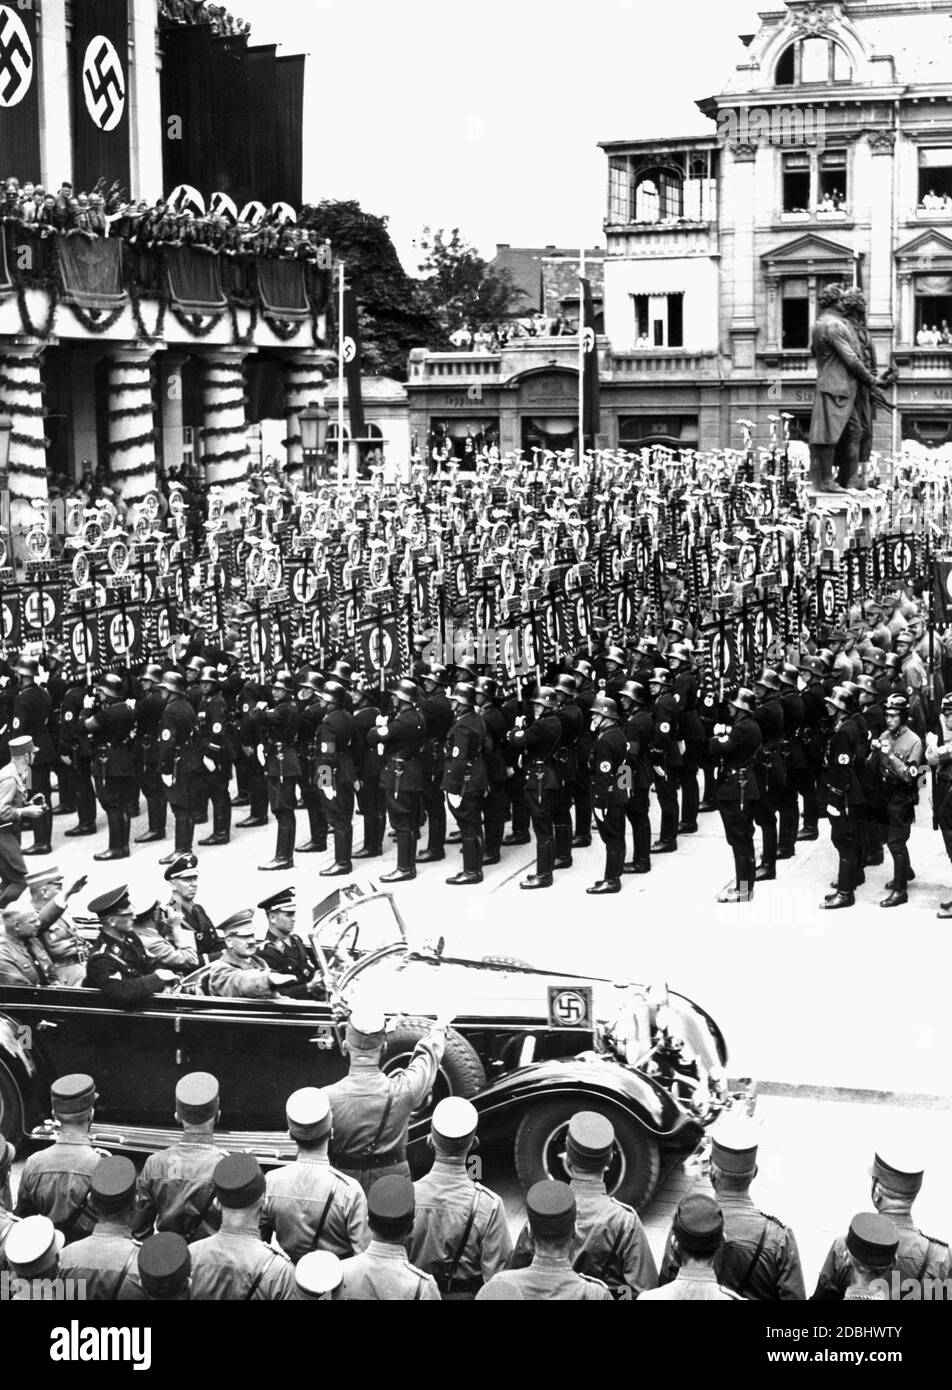 In the course of a historical conference, members of the SS stand around a monument to Schiller and Goethe in Weimar. Front left, Adolf Hitler greets members of the SA with the Nazi salute. Stock Photo